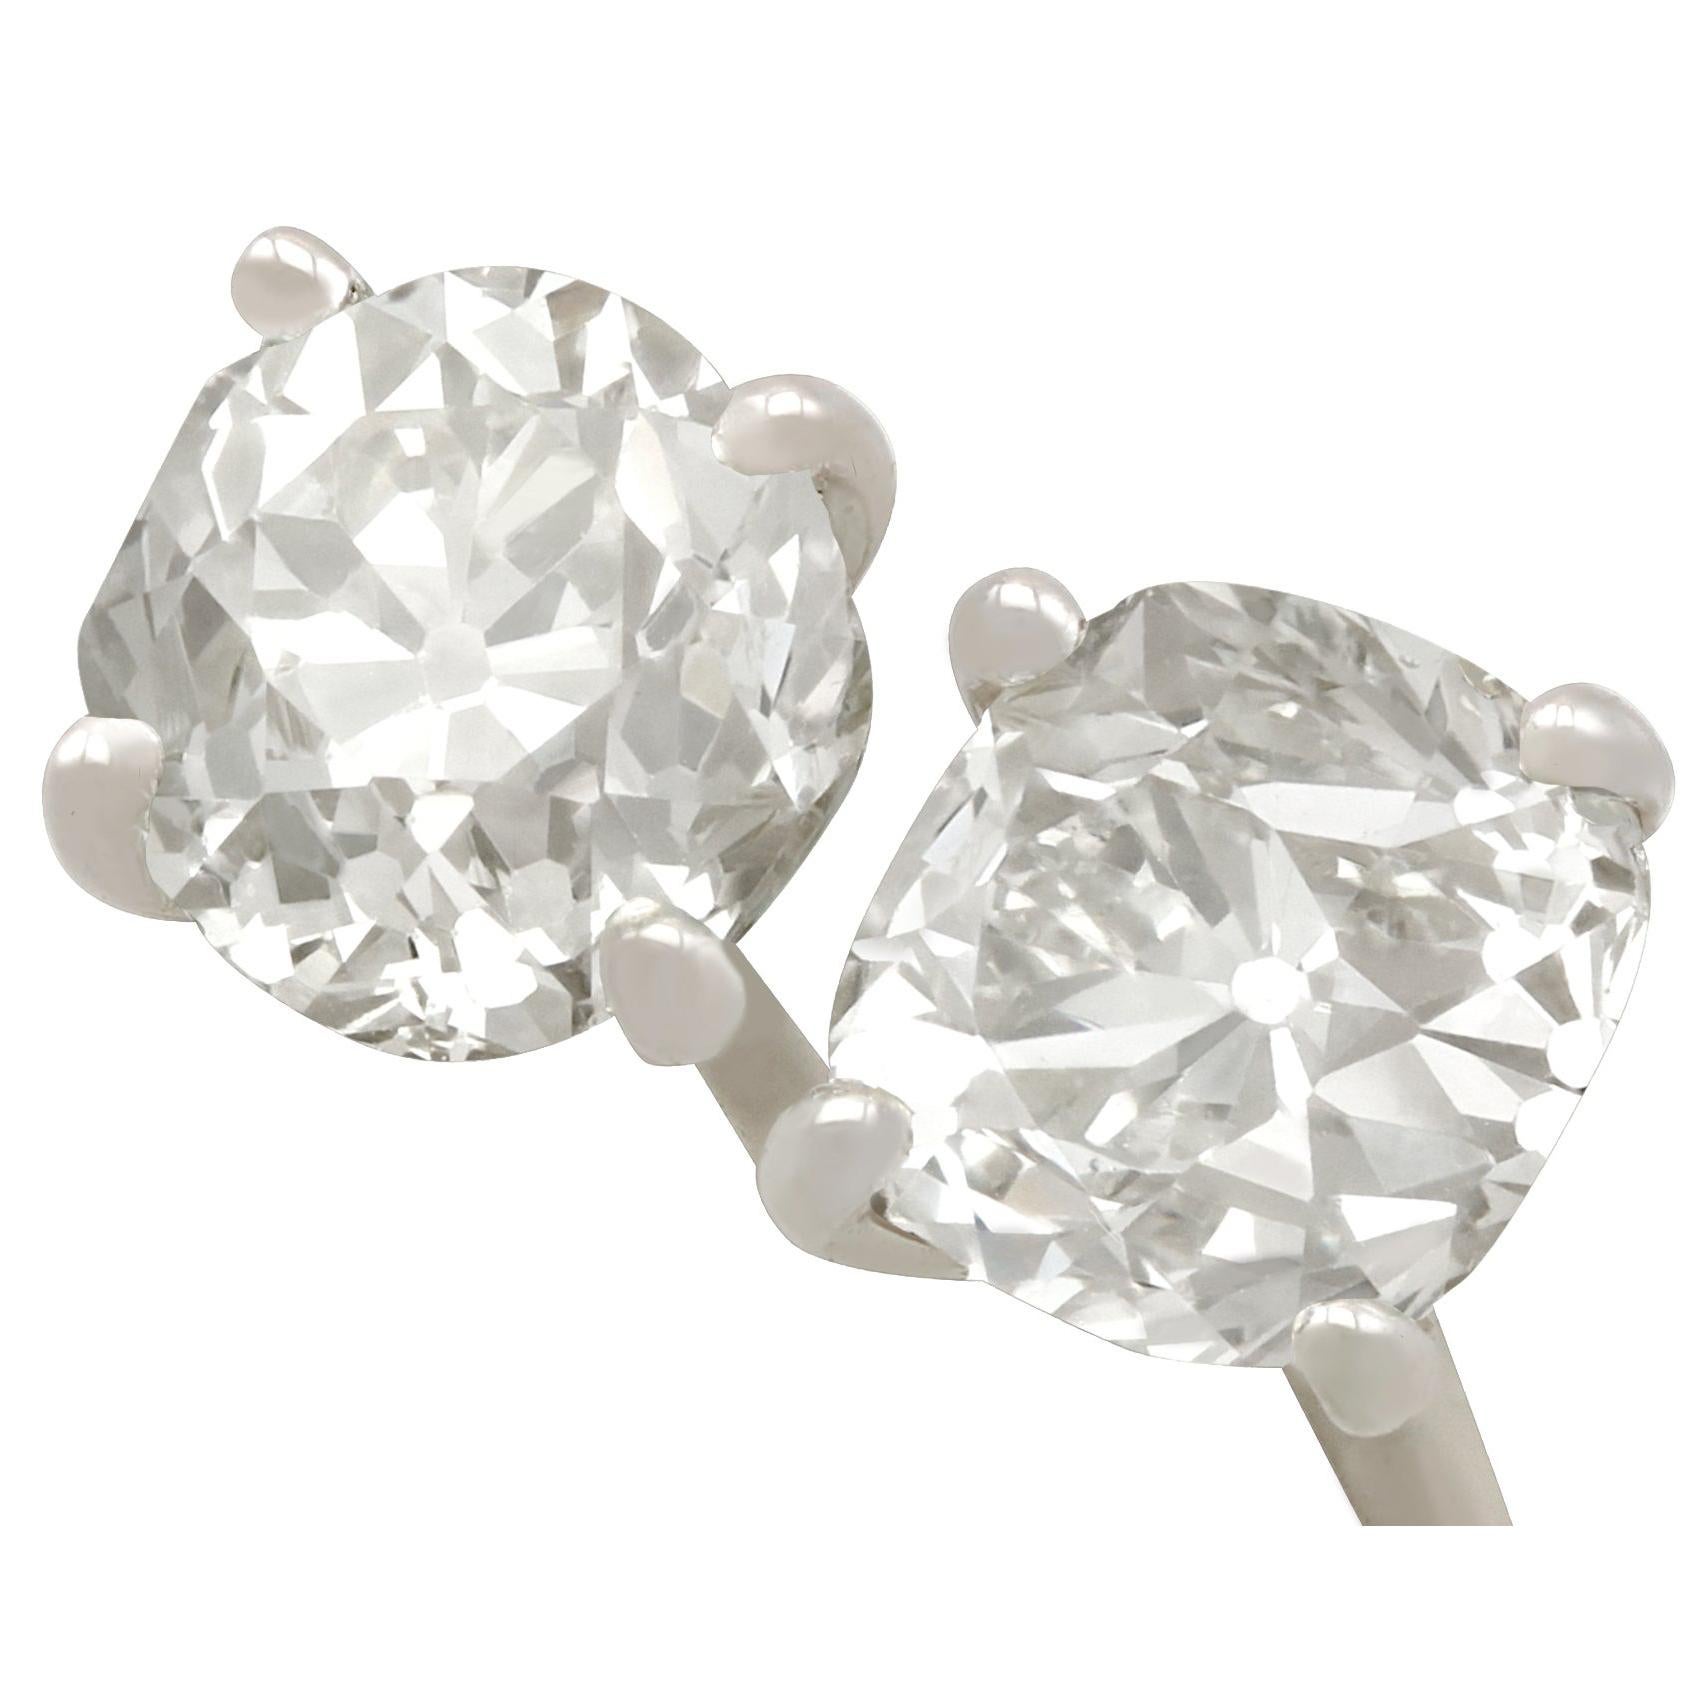 Antique and Contemporary 2.28 Carat Diamond and White Gold Stud Earrings